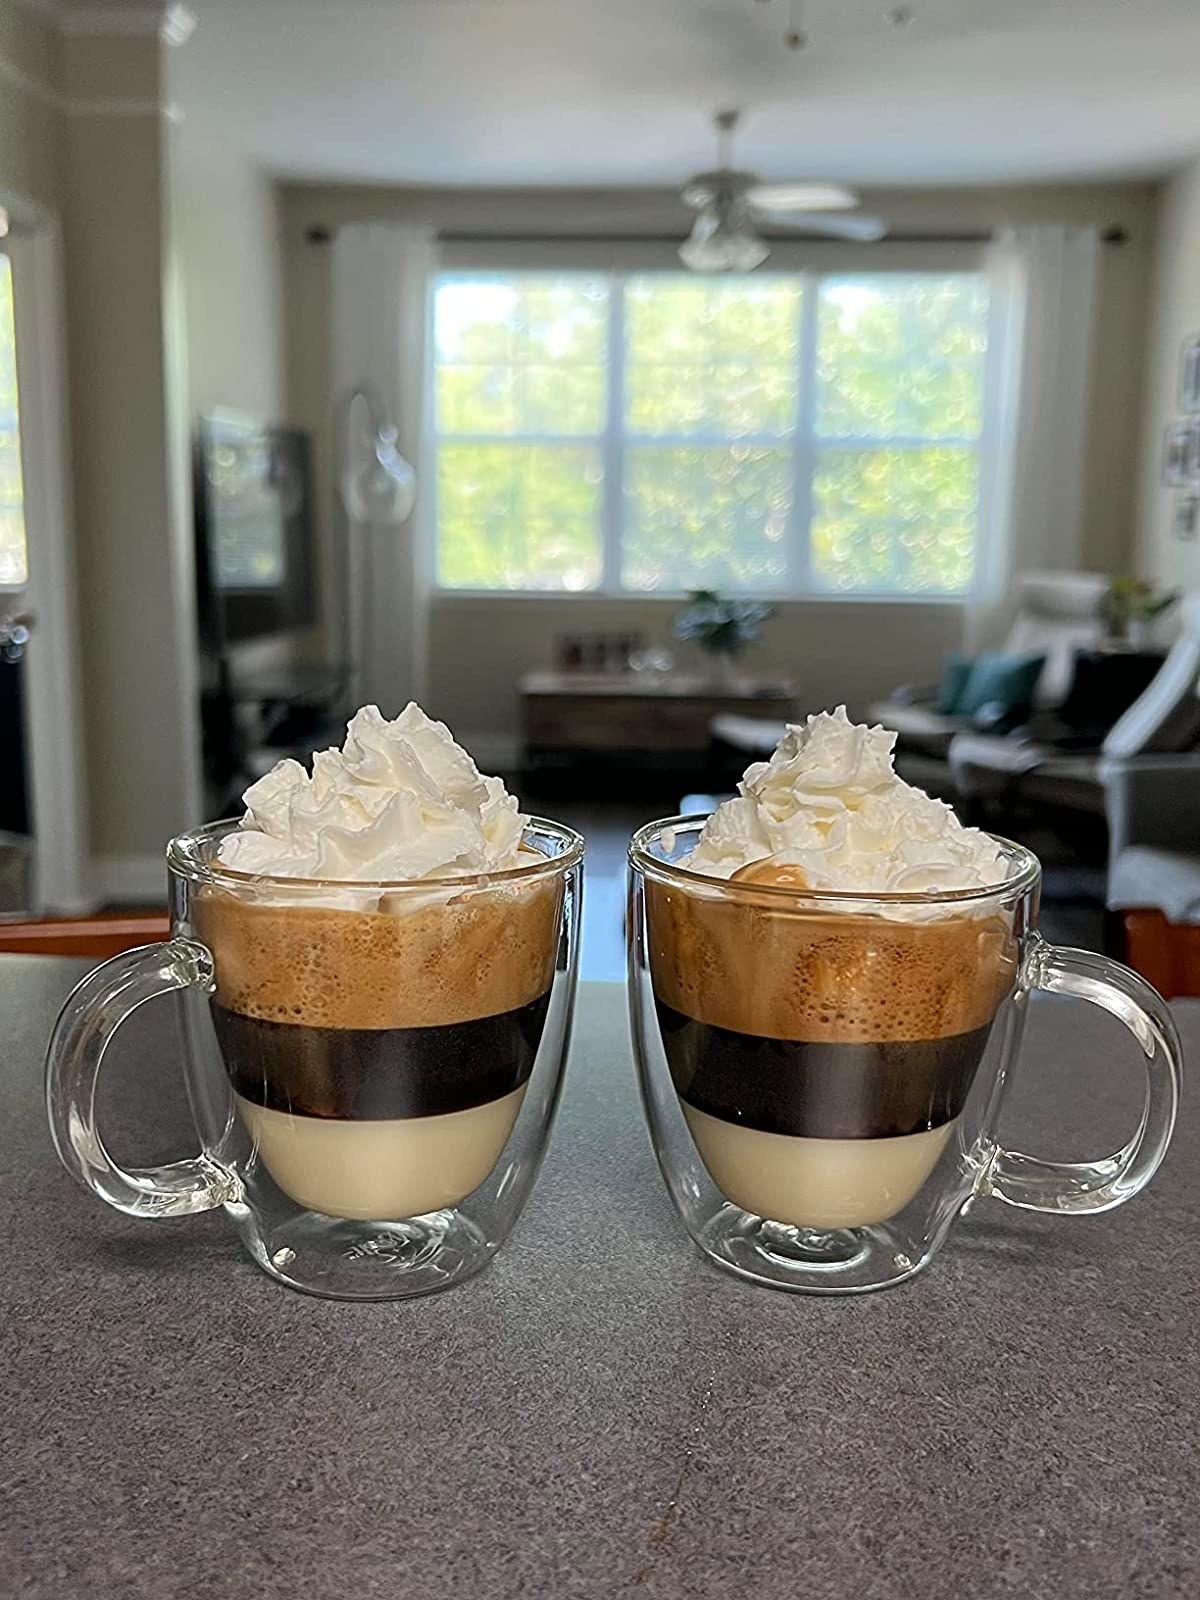 Reviewer image of two cups of coffee made in the glass mugs